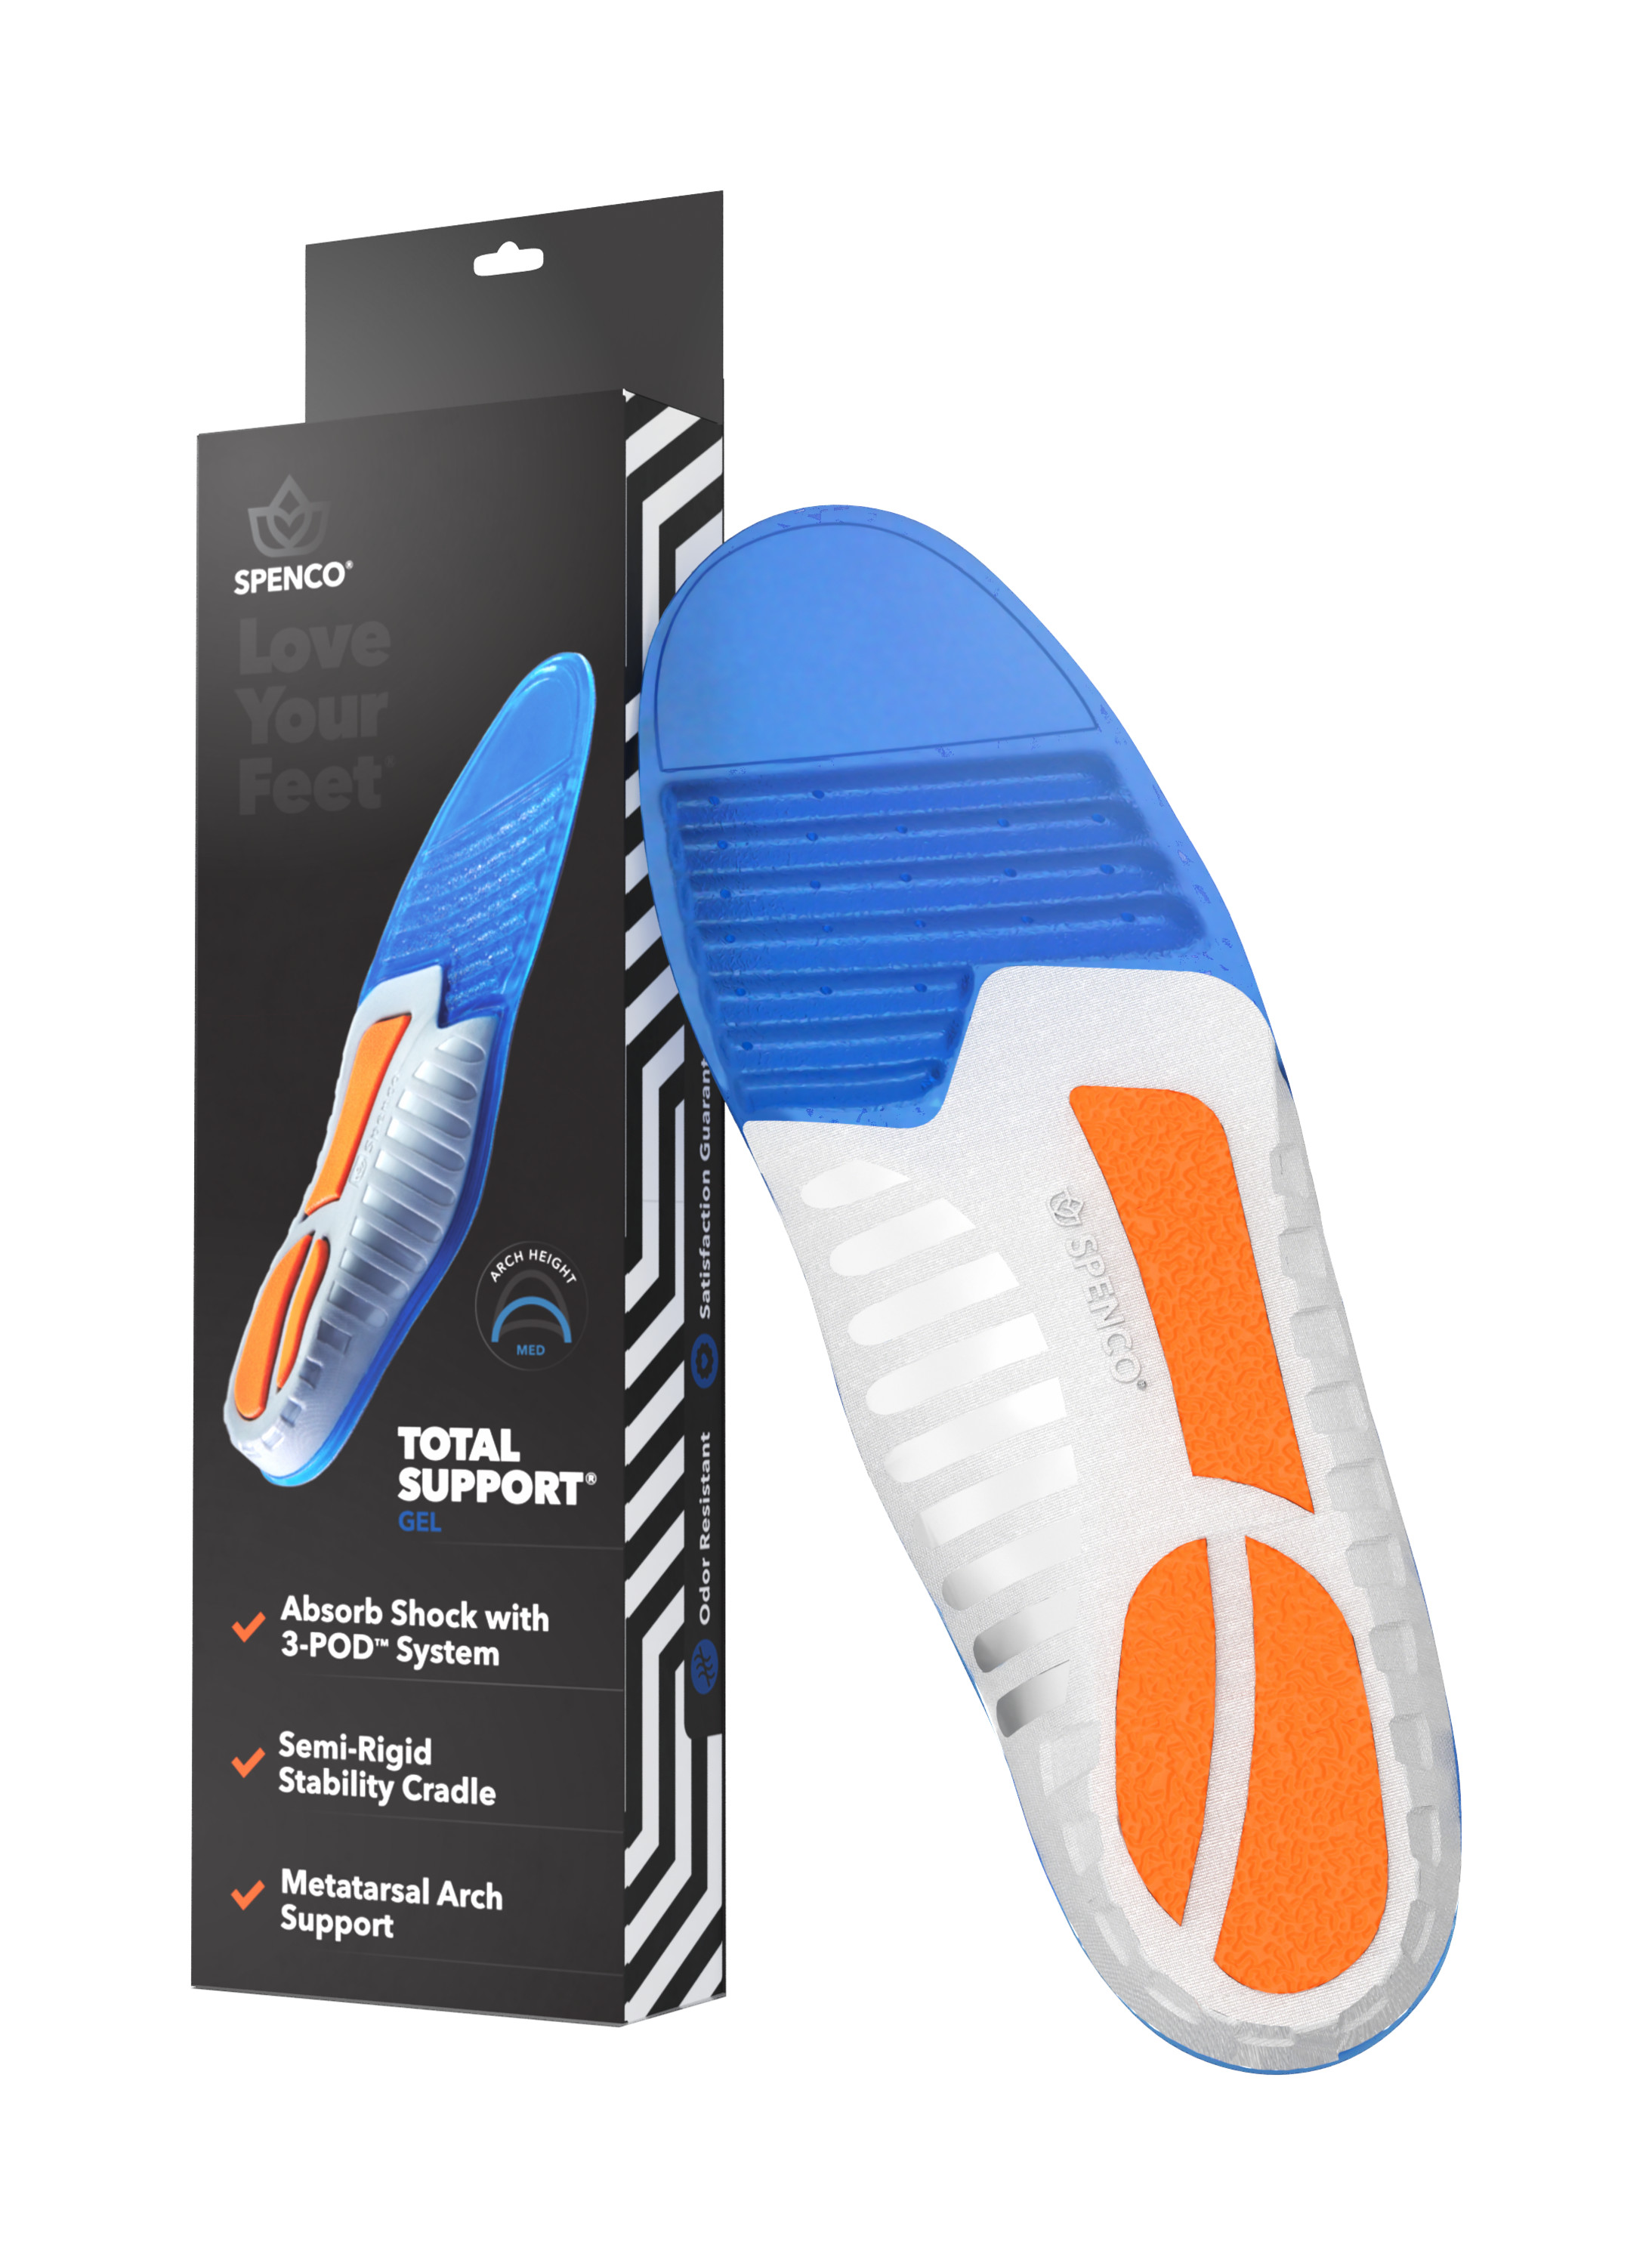 Spenco Total Support Gel Insole - image 1 of 3